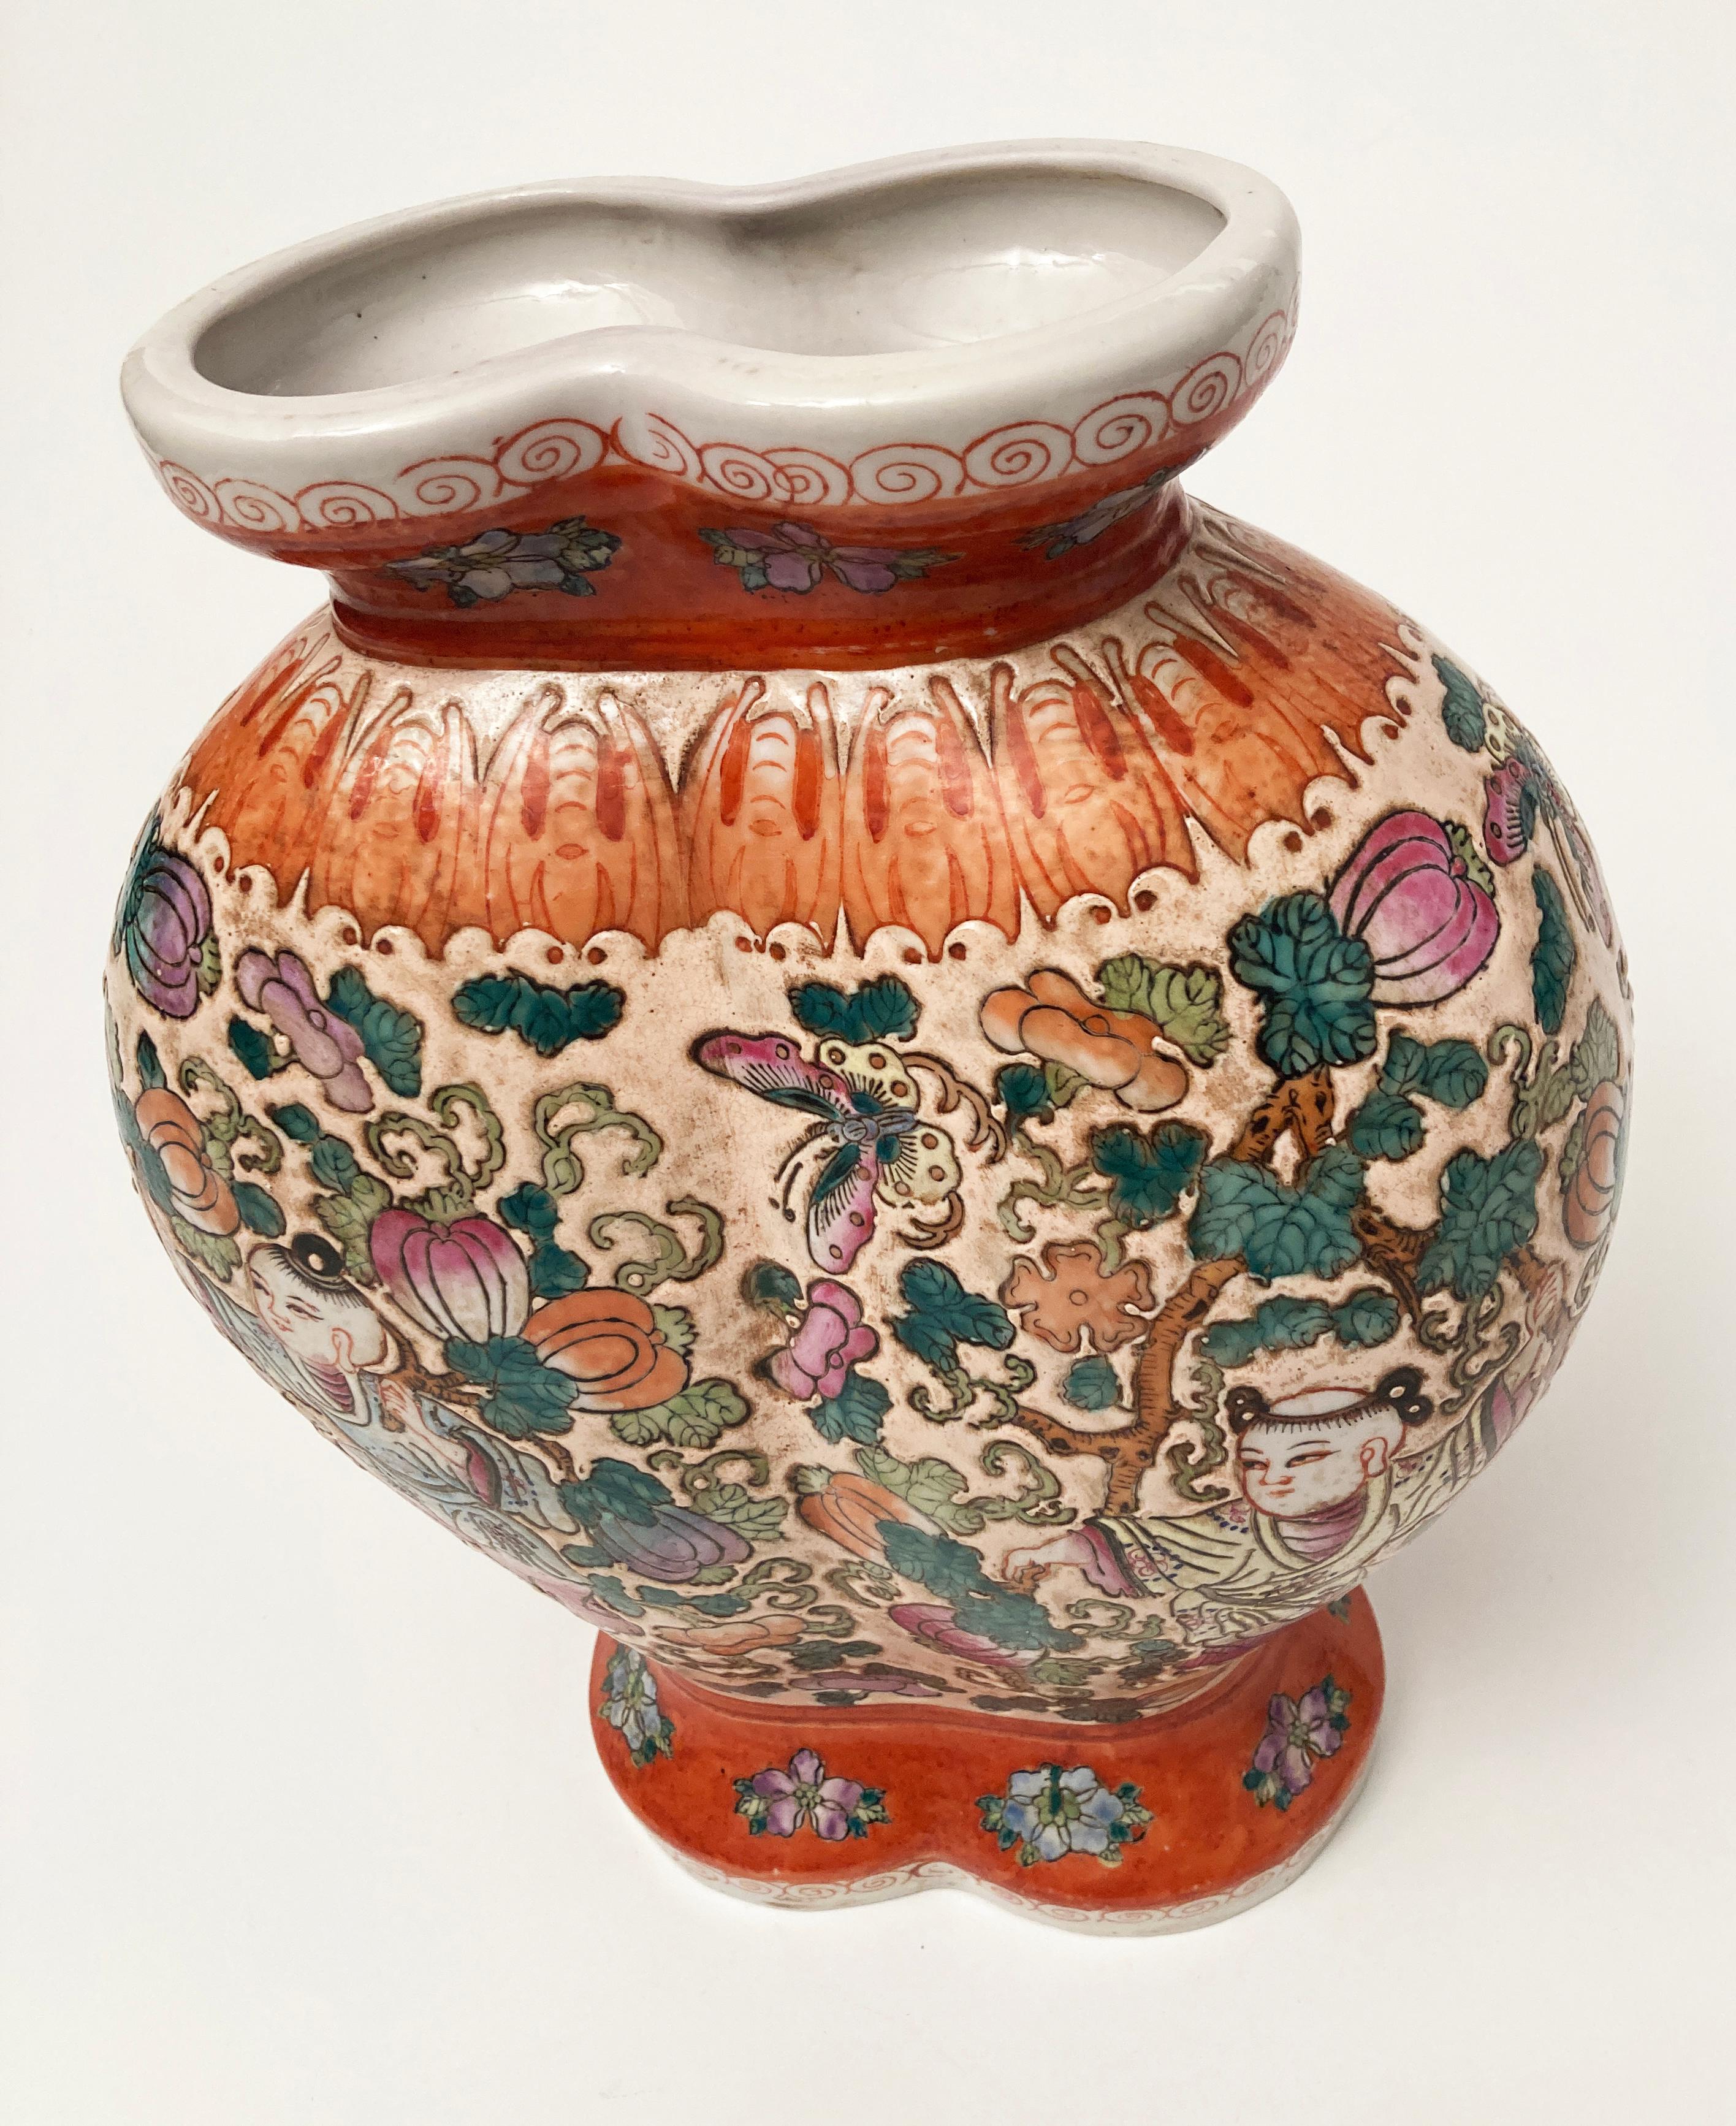 Qing Ching Dynasty 1821-1850 Porcelain Enamel Double Mouth Chinese Vase In Good Condition For Sale In Louisville, KY